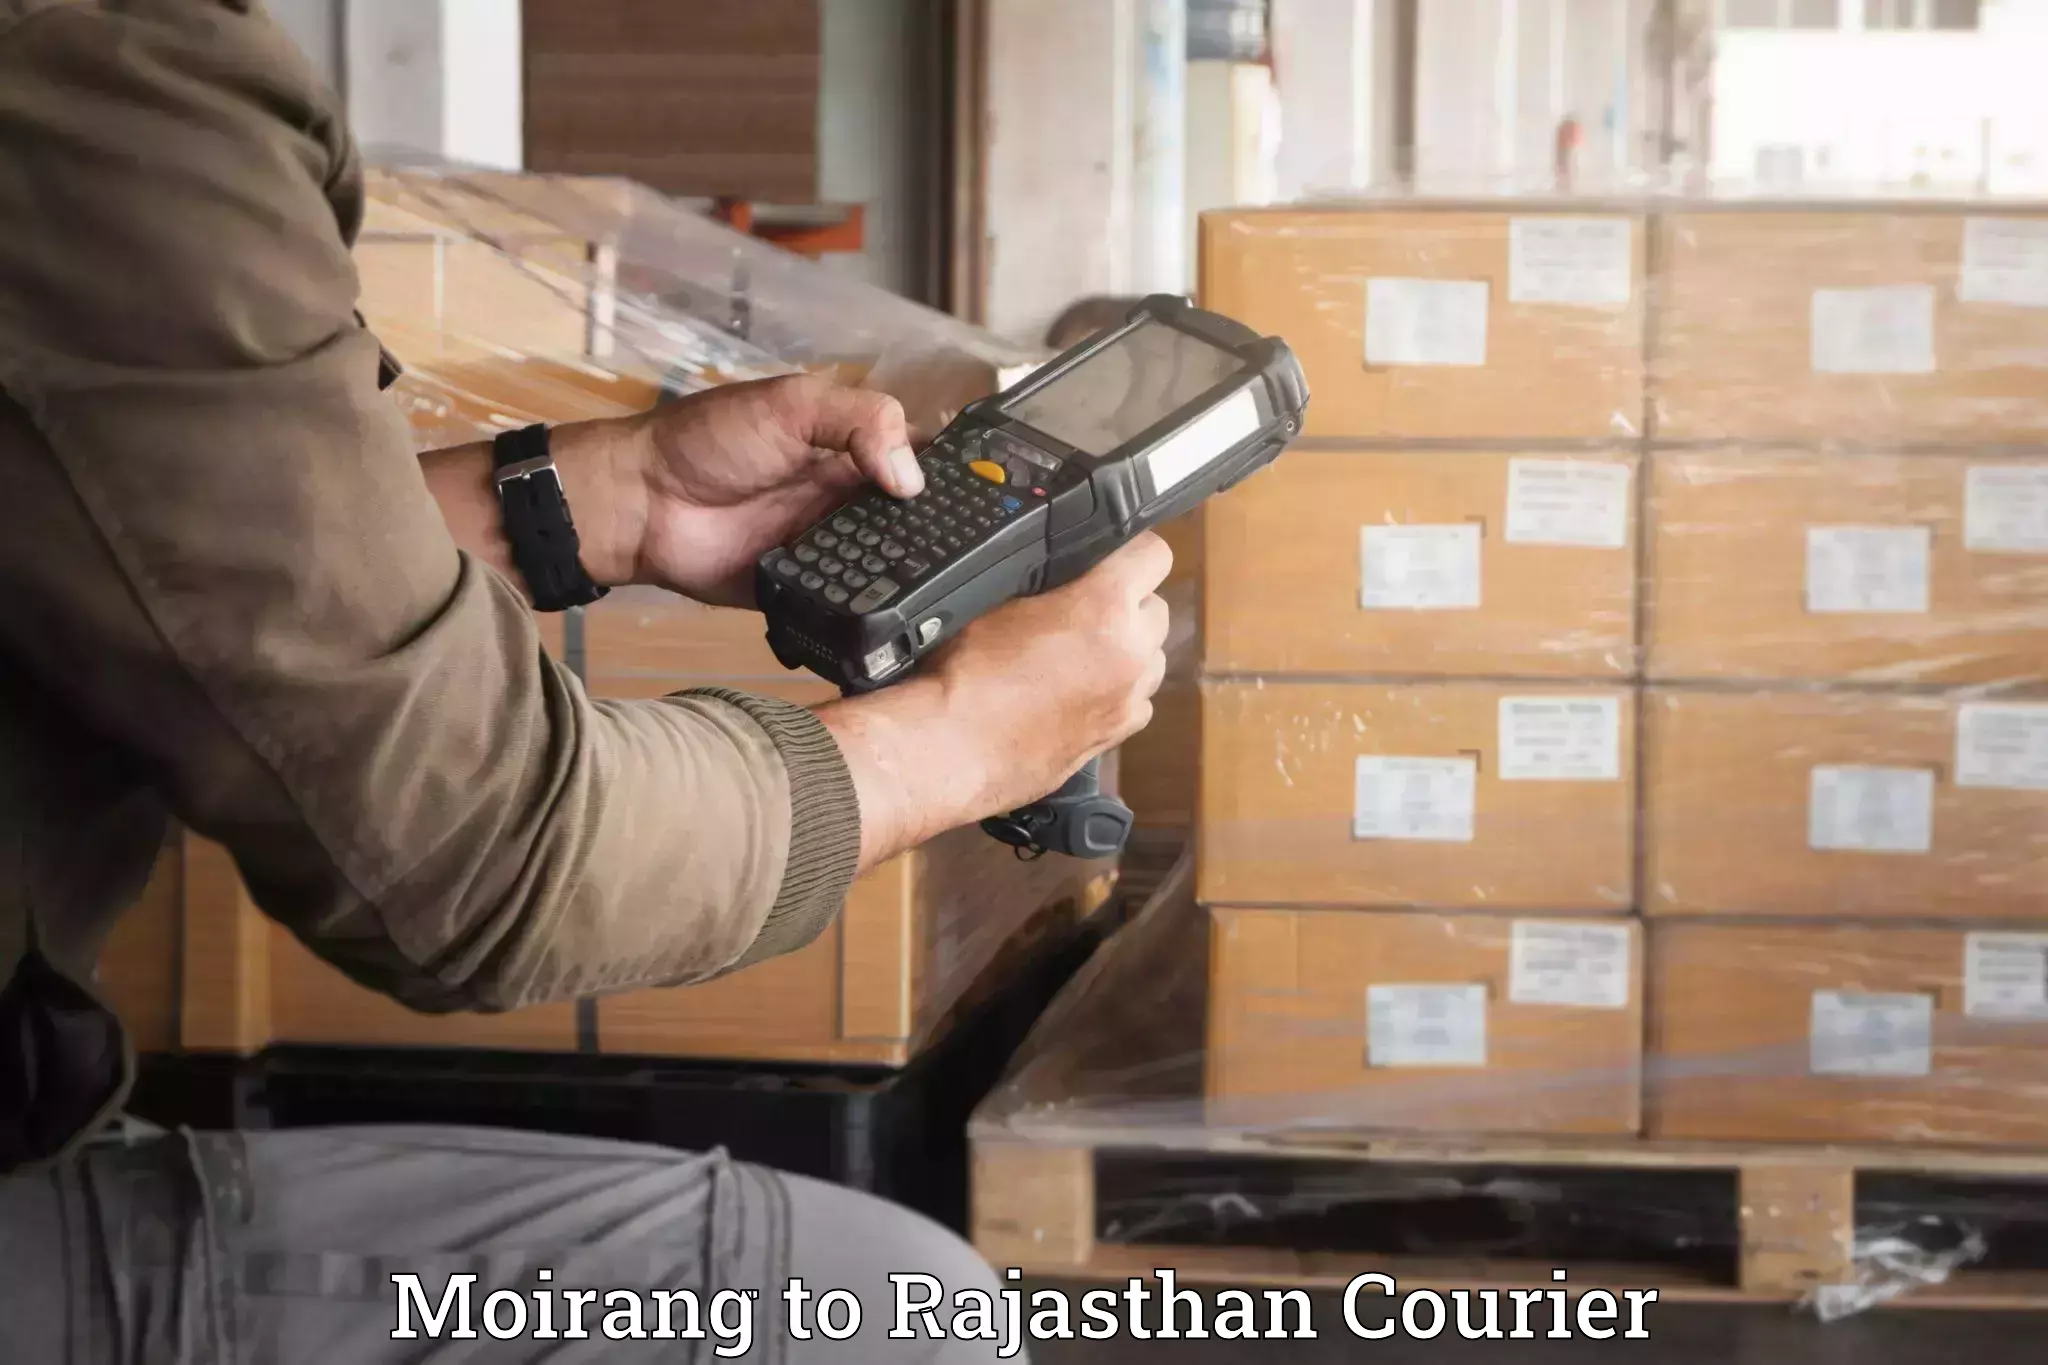 Luggage shipment specialists Moirang to Rajasthan